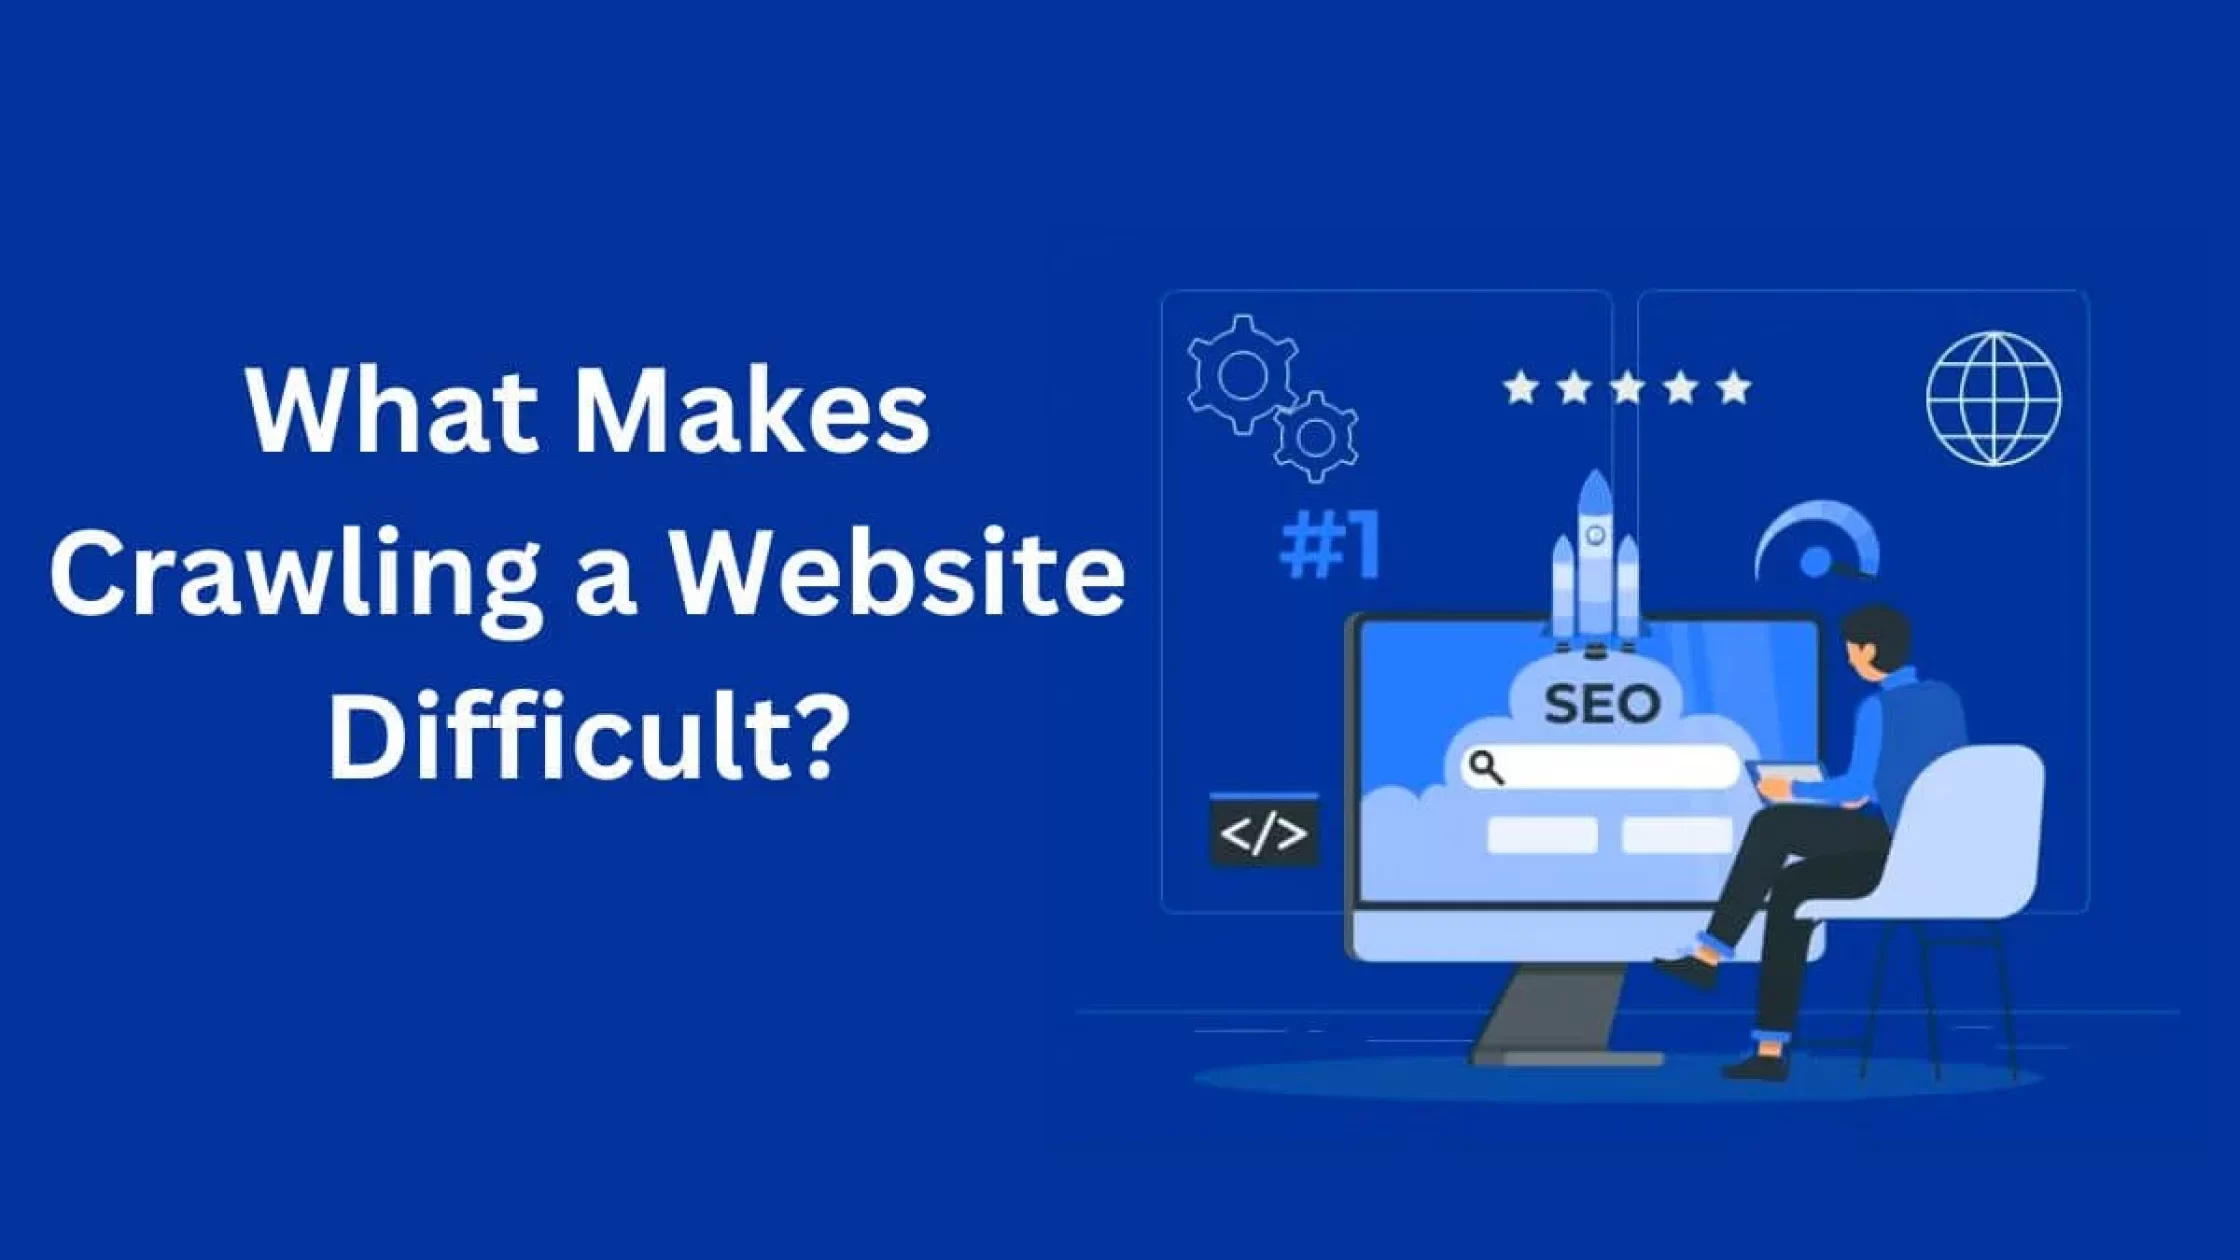 What Makes Crawling a Website Difficult?